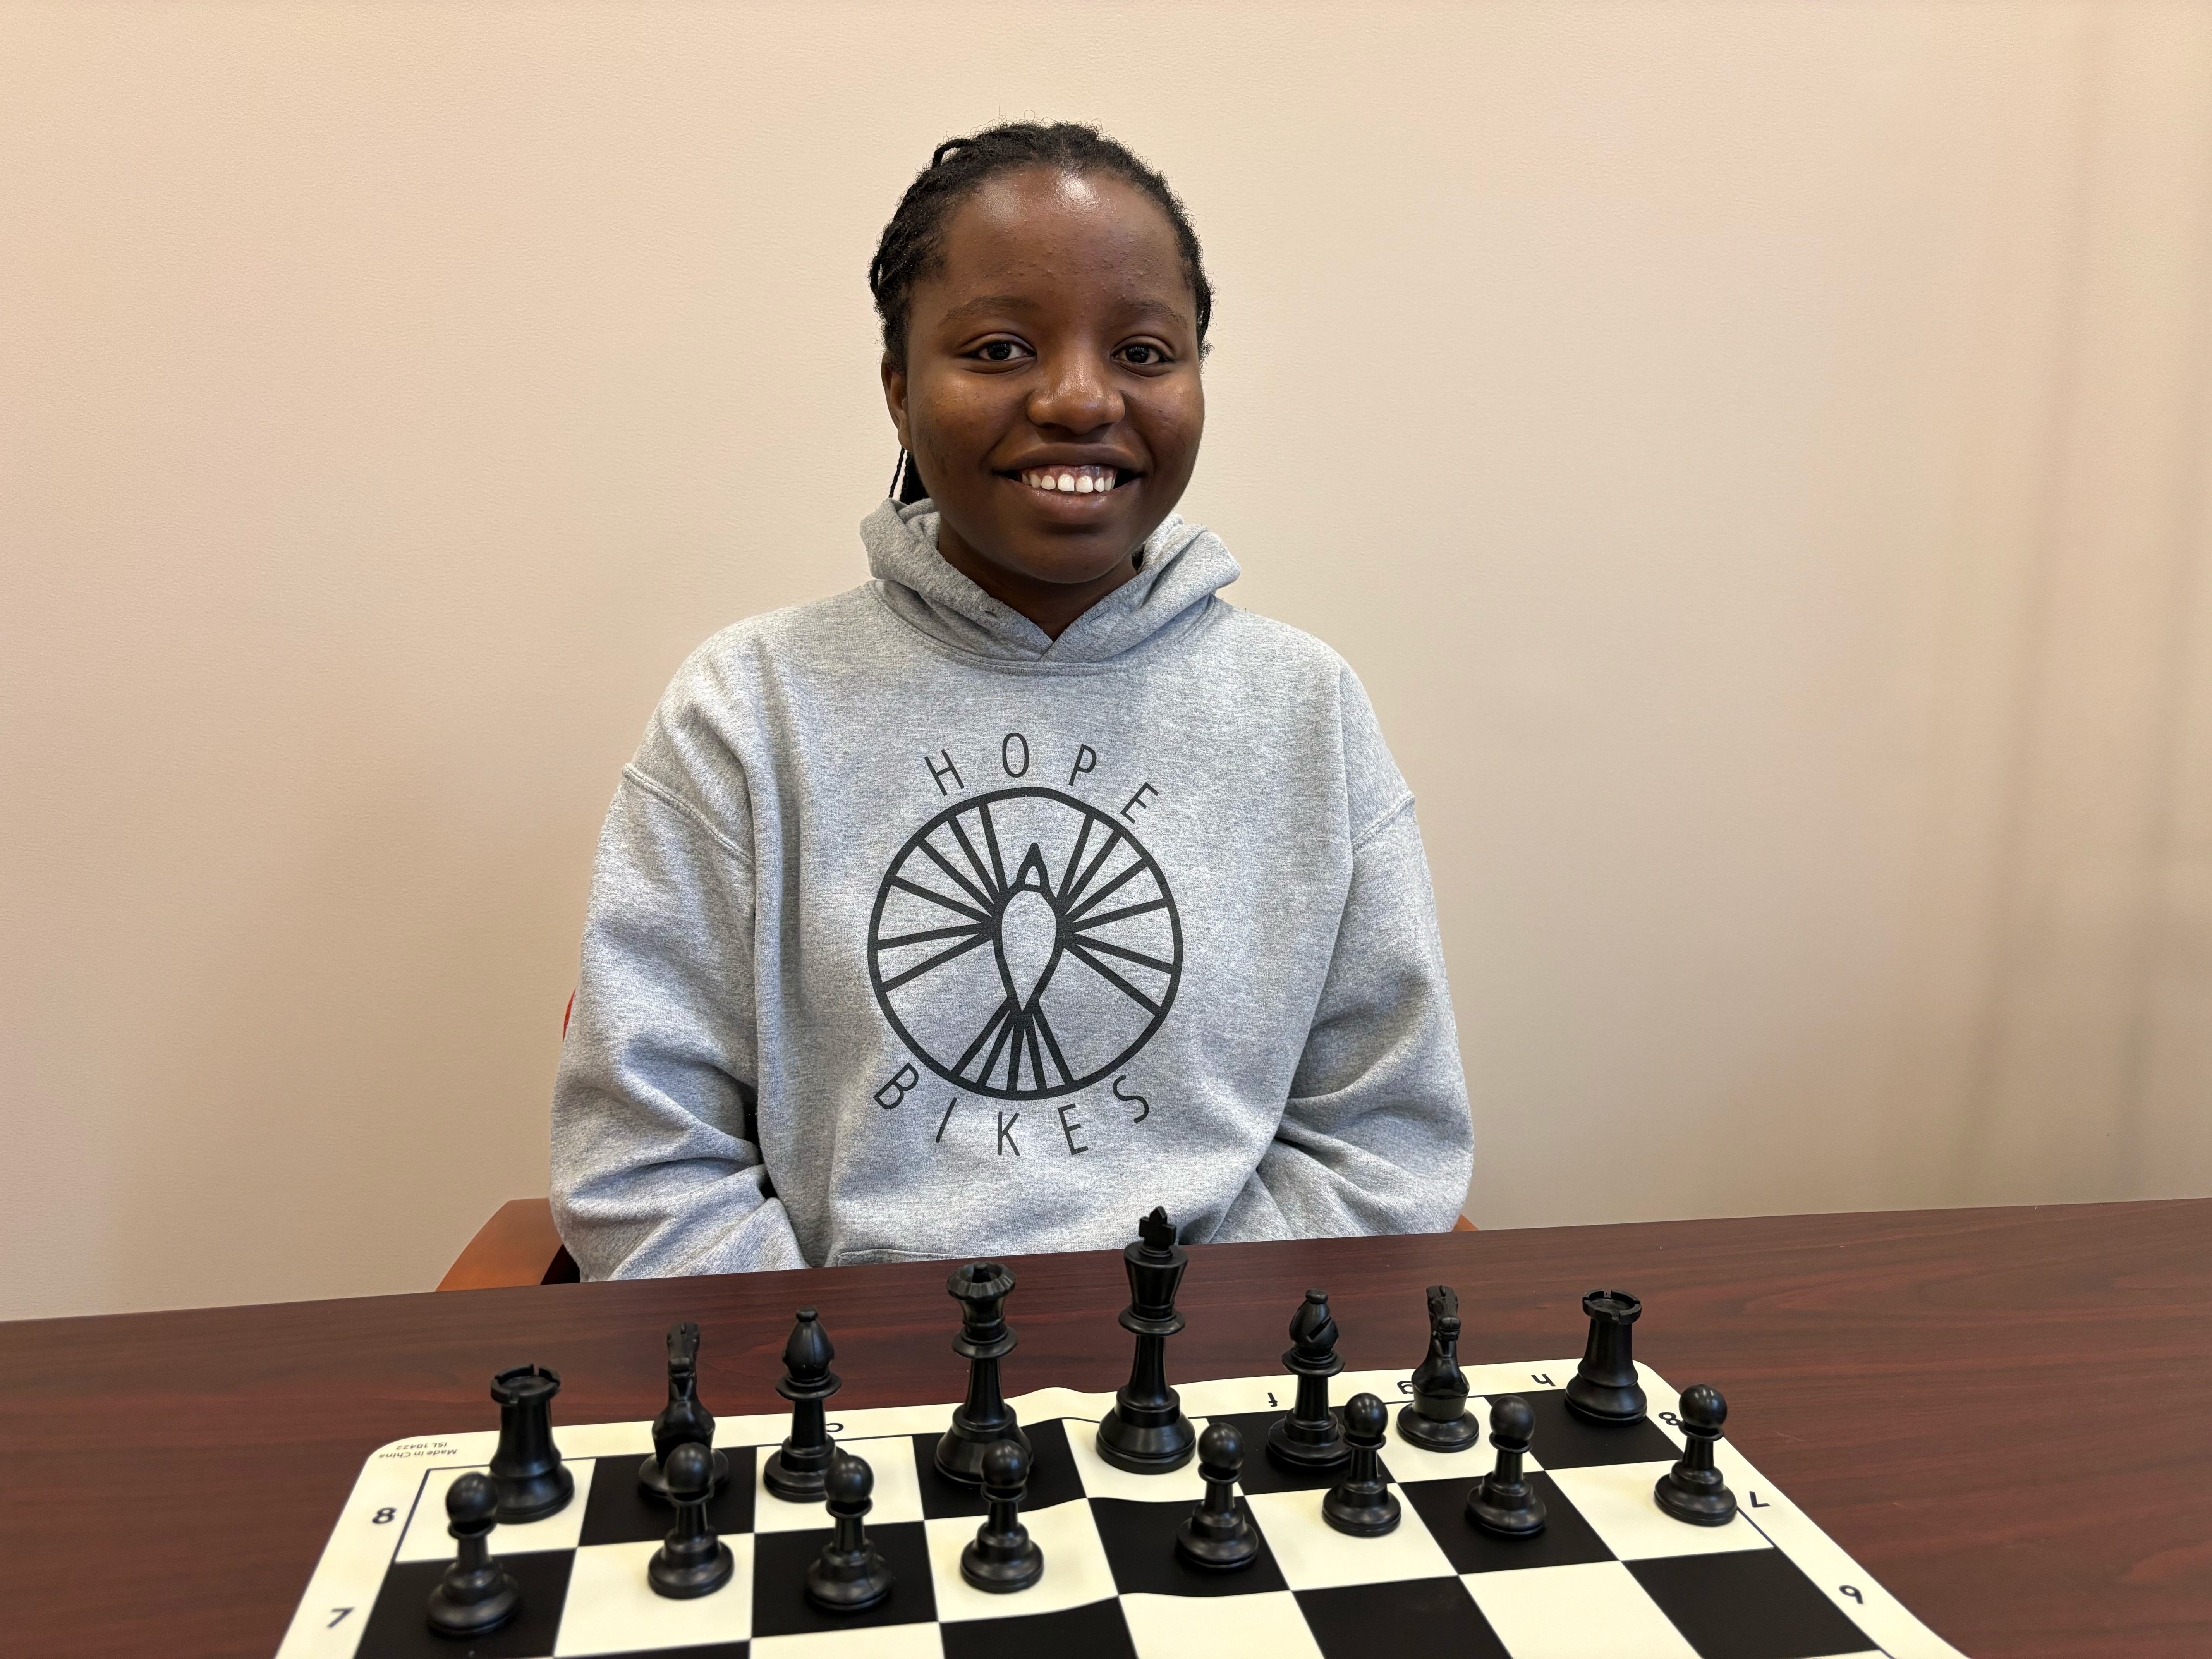 Besa Masaiti smiling for the camera, sitting in front of a chessboard